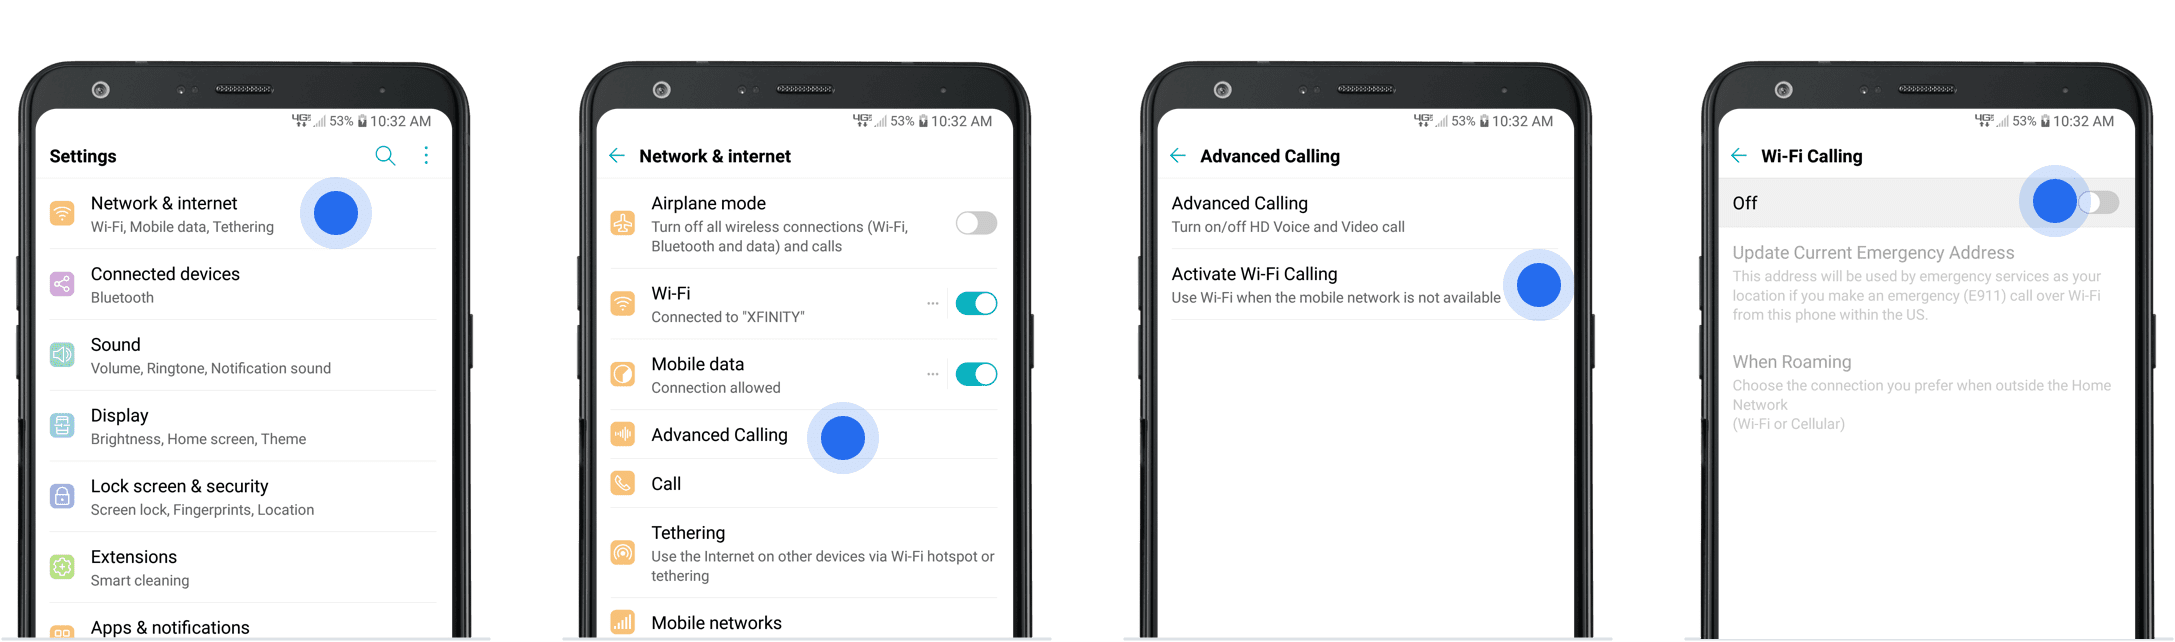 StepbyStep Guide Enabling WiFi Calling on Your Android Device